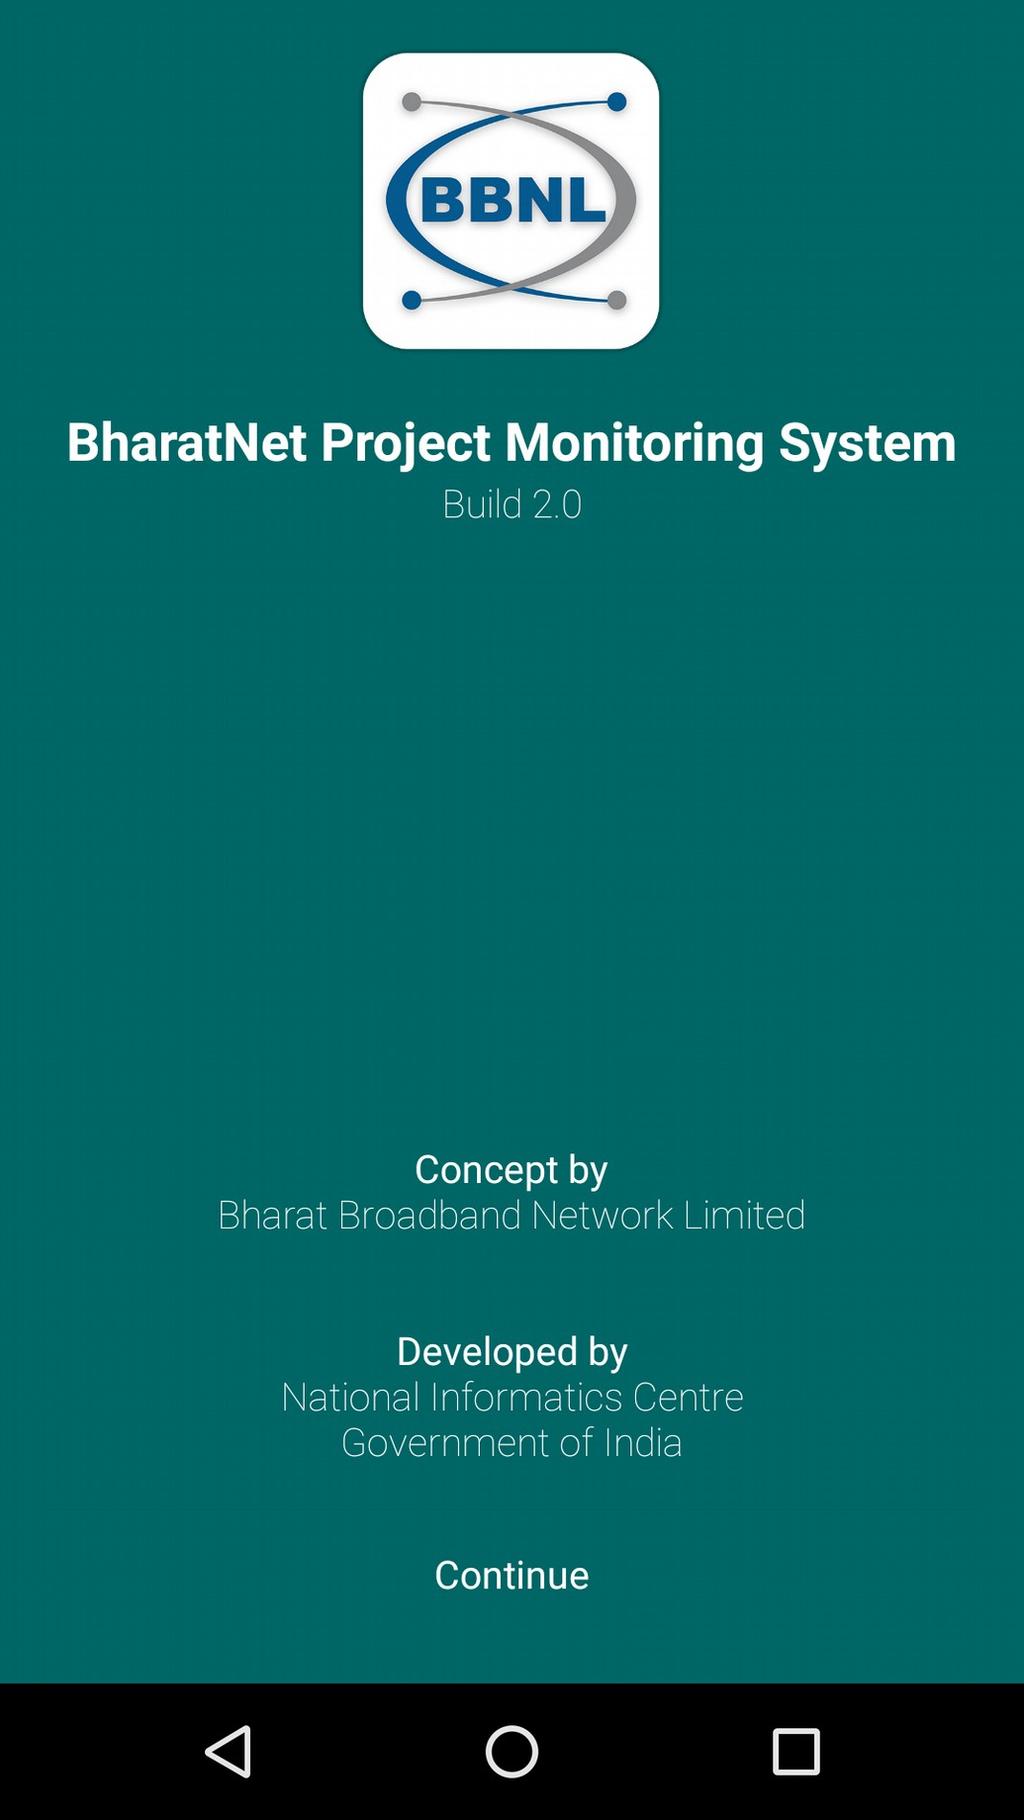 Mobile App User Guide 2.0 Bharat Broadband Network Limited Download application from email or bbnl.nic.in and install.